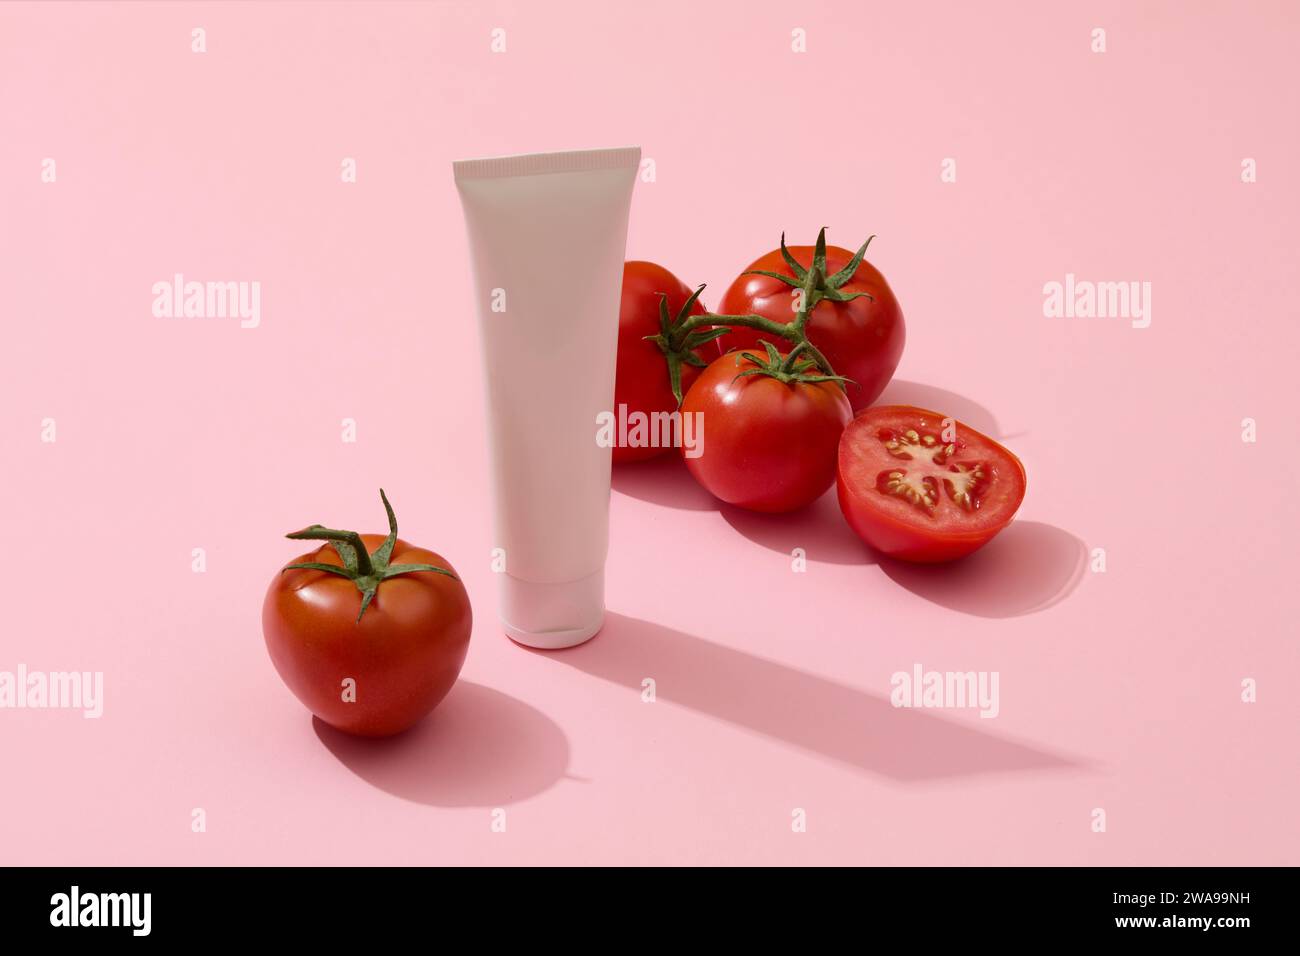 White tube without label decorated with several tomatoes. Pink background. Tomatoes are packed with enzymes that can exfoliate your skin gently Stock Photo